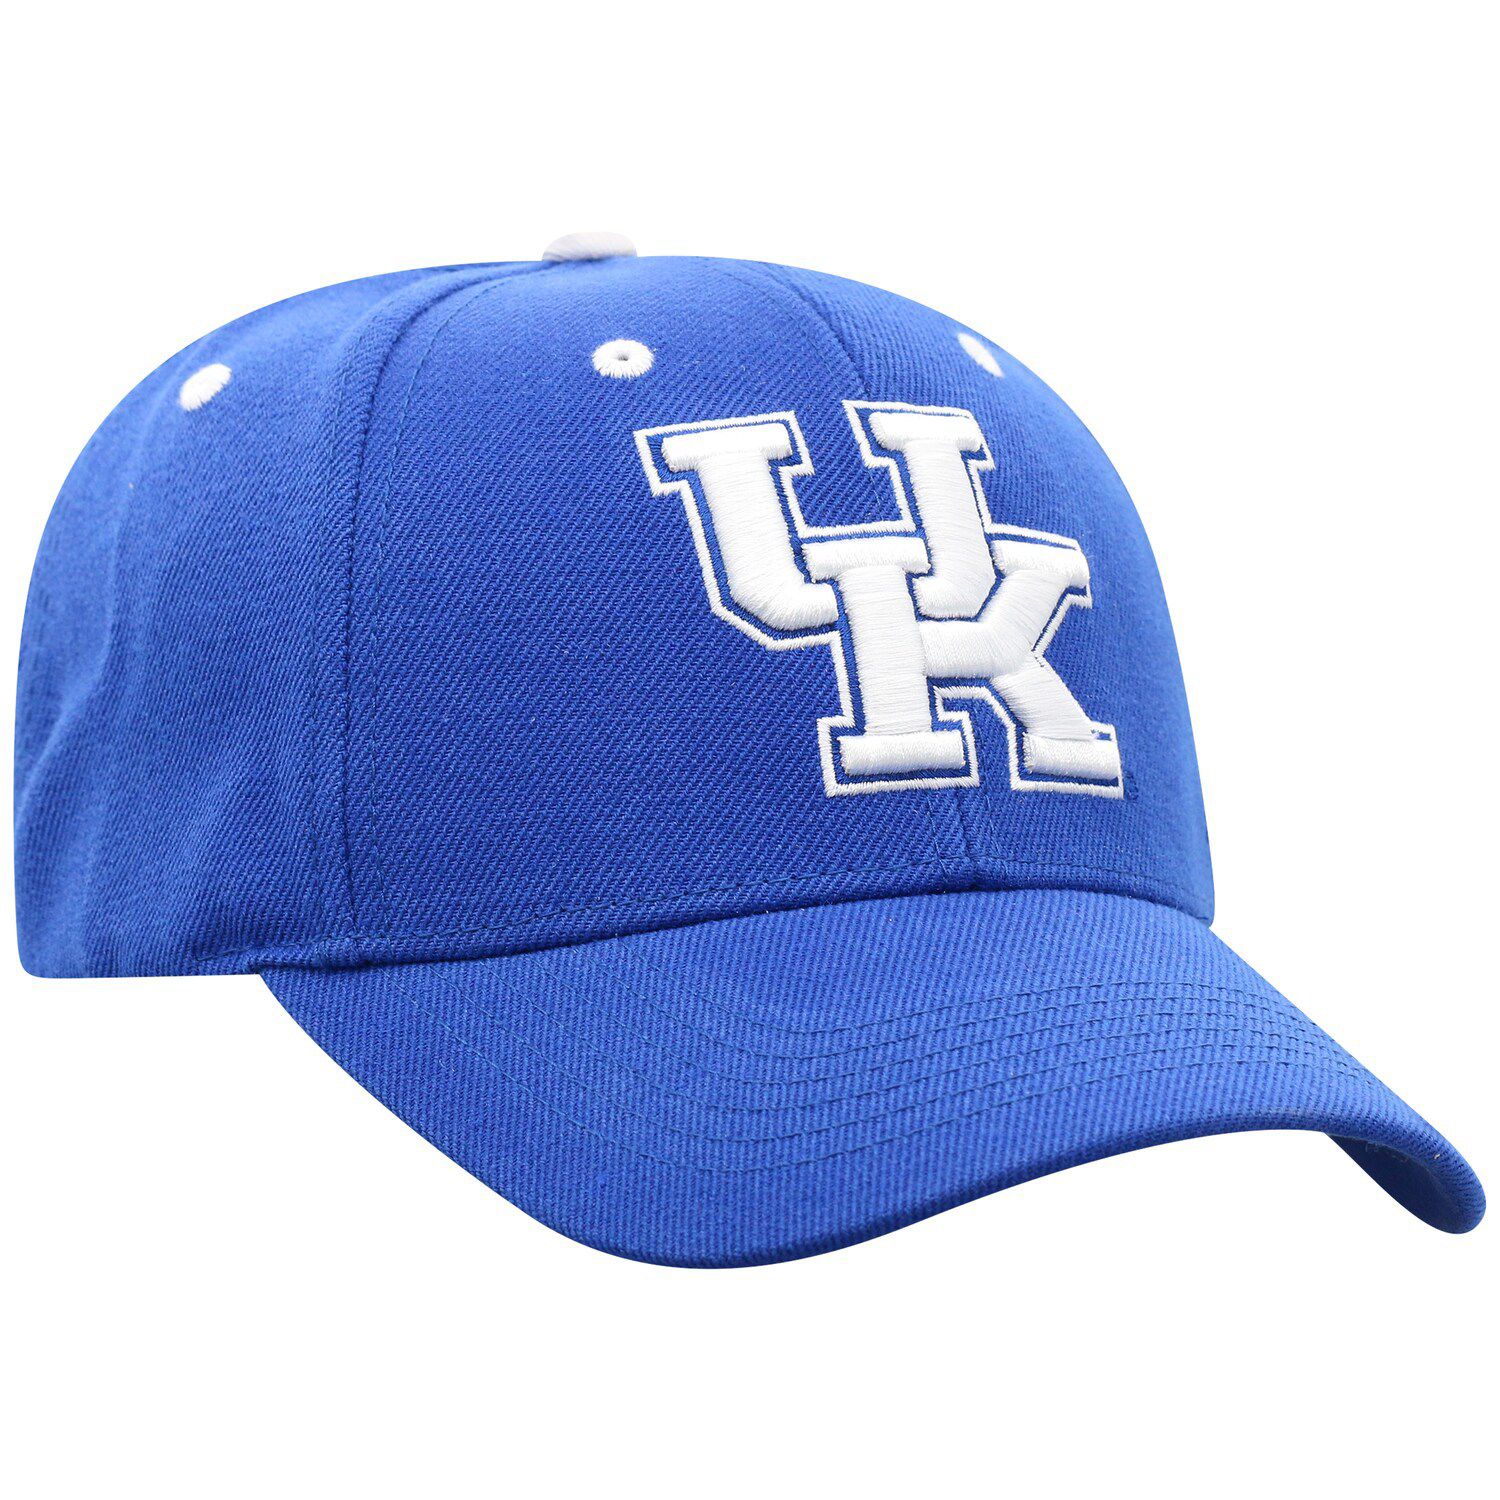 Image for Unbranded Men's Top of the World Royal Kentucky Wildcats Triple Threat Team Adjustable Hat at Kohl's.